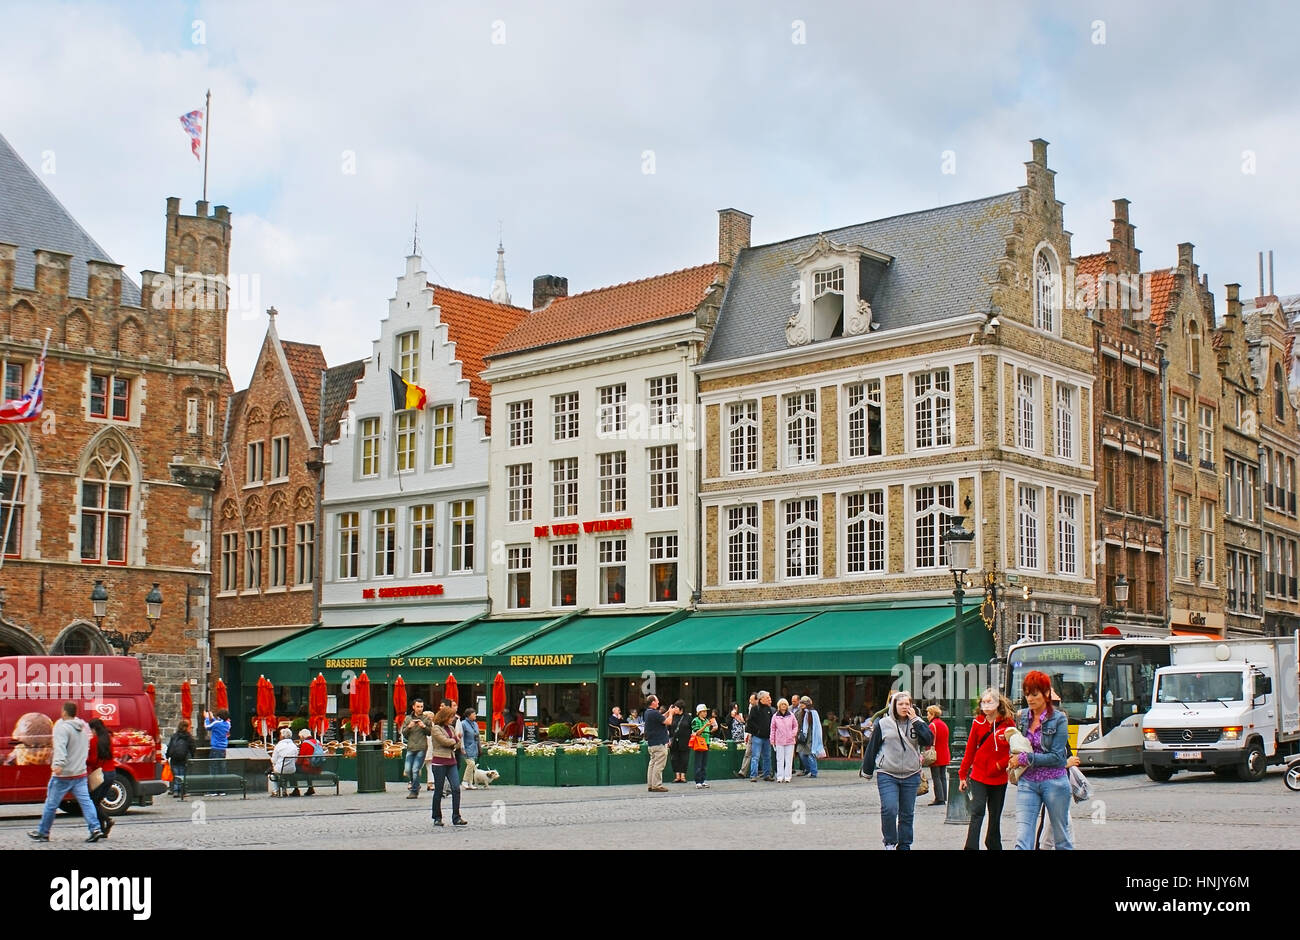 BRUGES, BELGIUM - MAY 26, 2011: The Markt Square is the best place to visit cafe or restaurant in historic stepped gable mansion and enjoy the view on Stock Photo